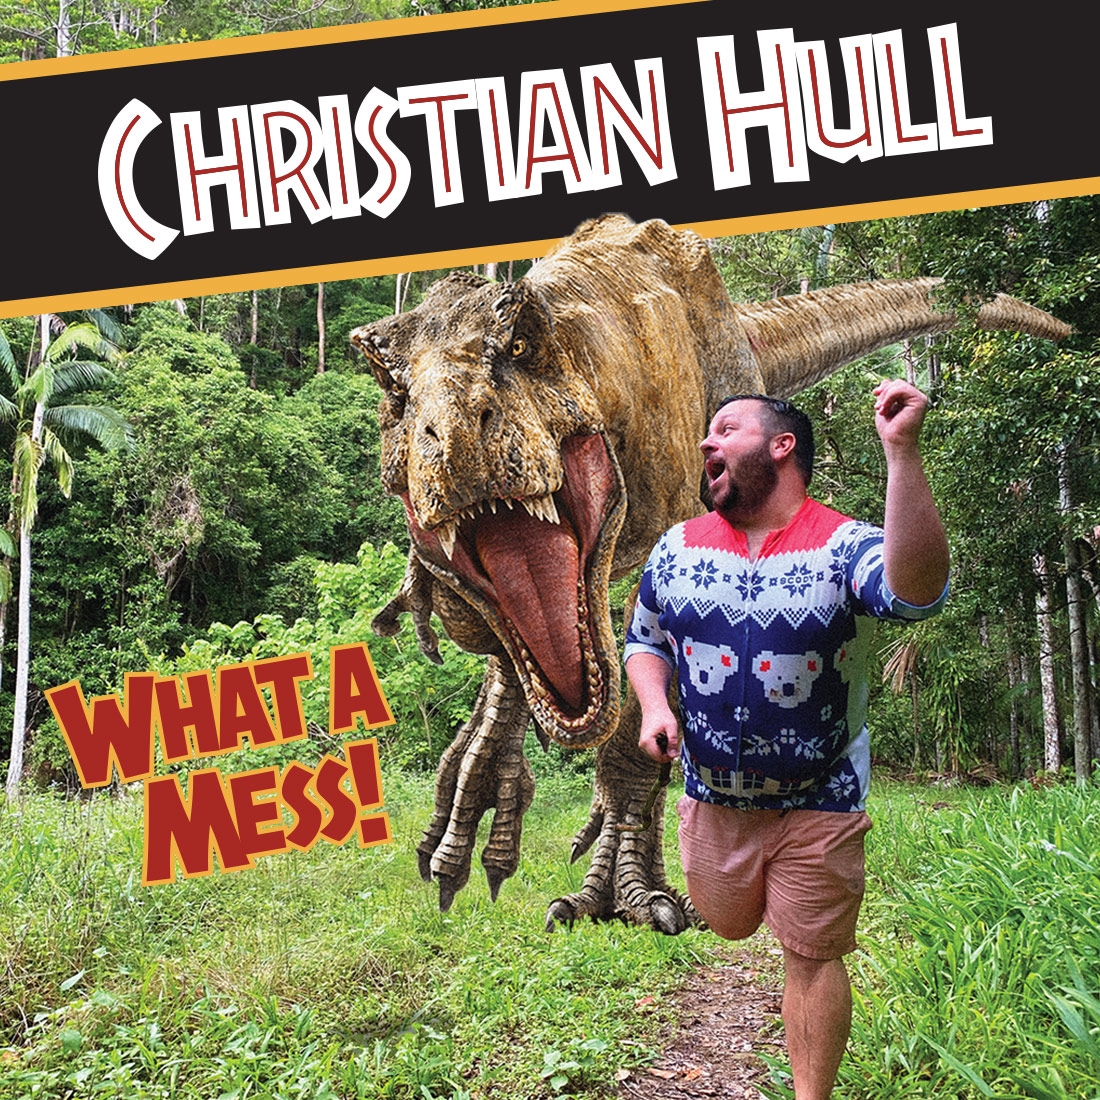 CHRISTIAN HULL - WHAT A MESS! 